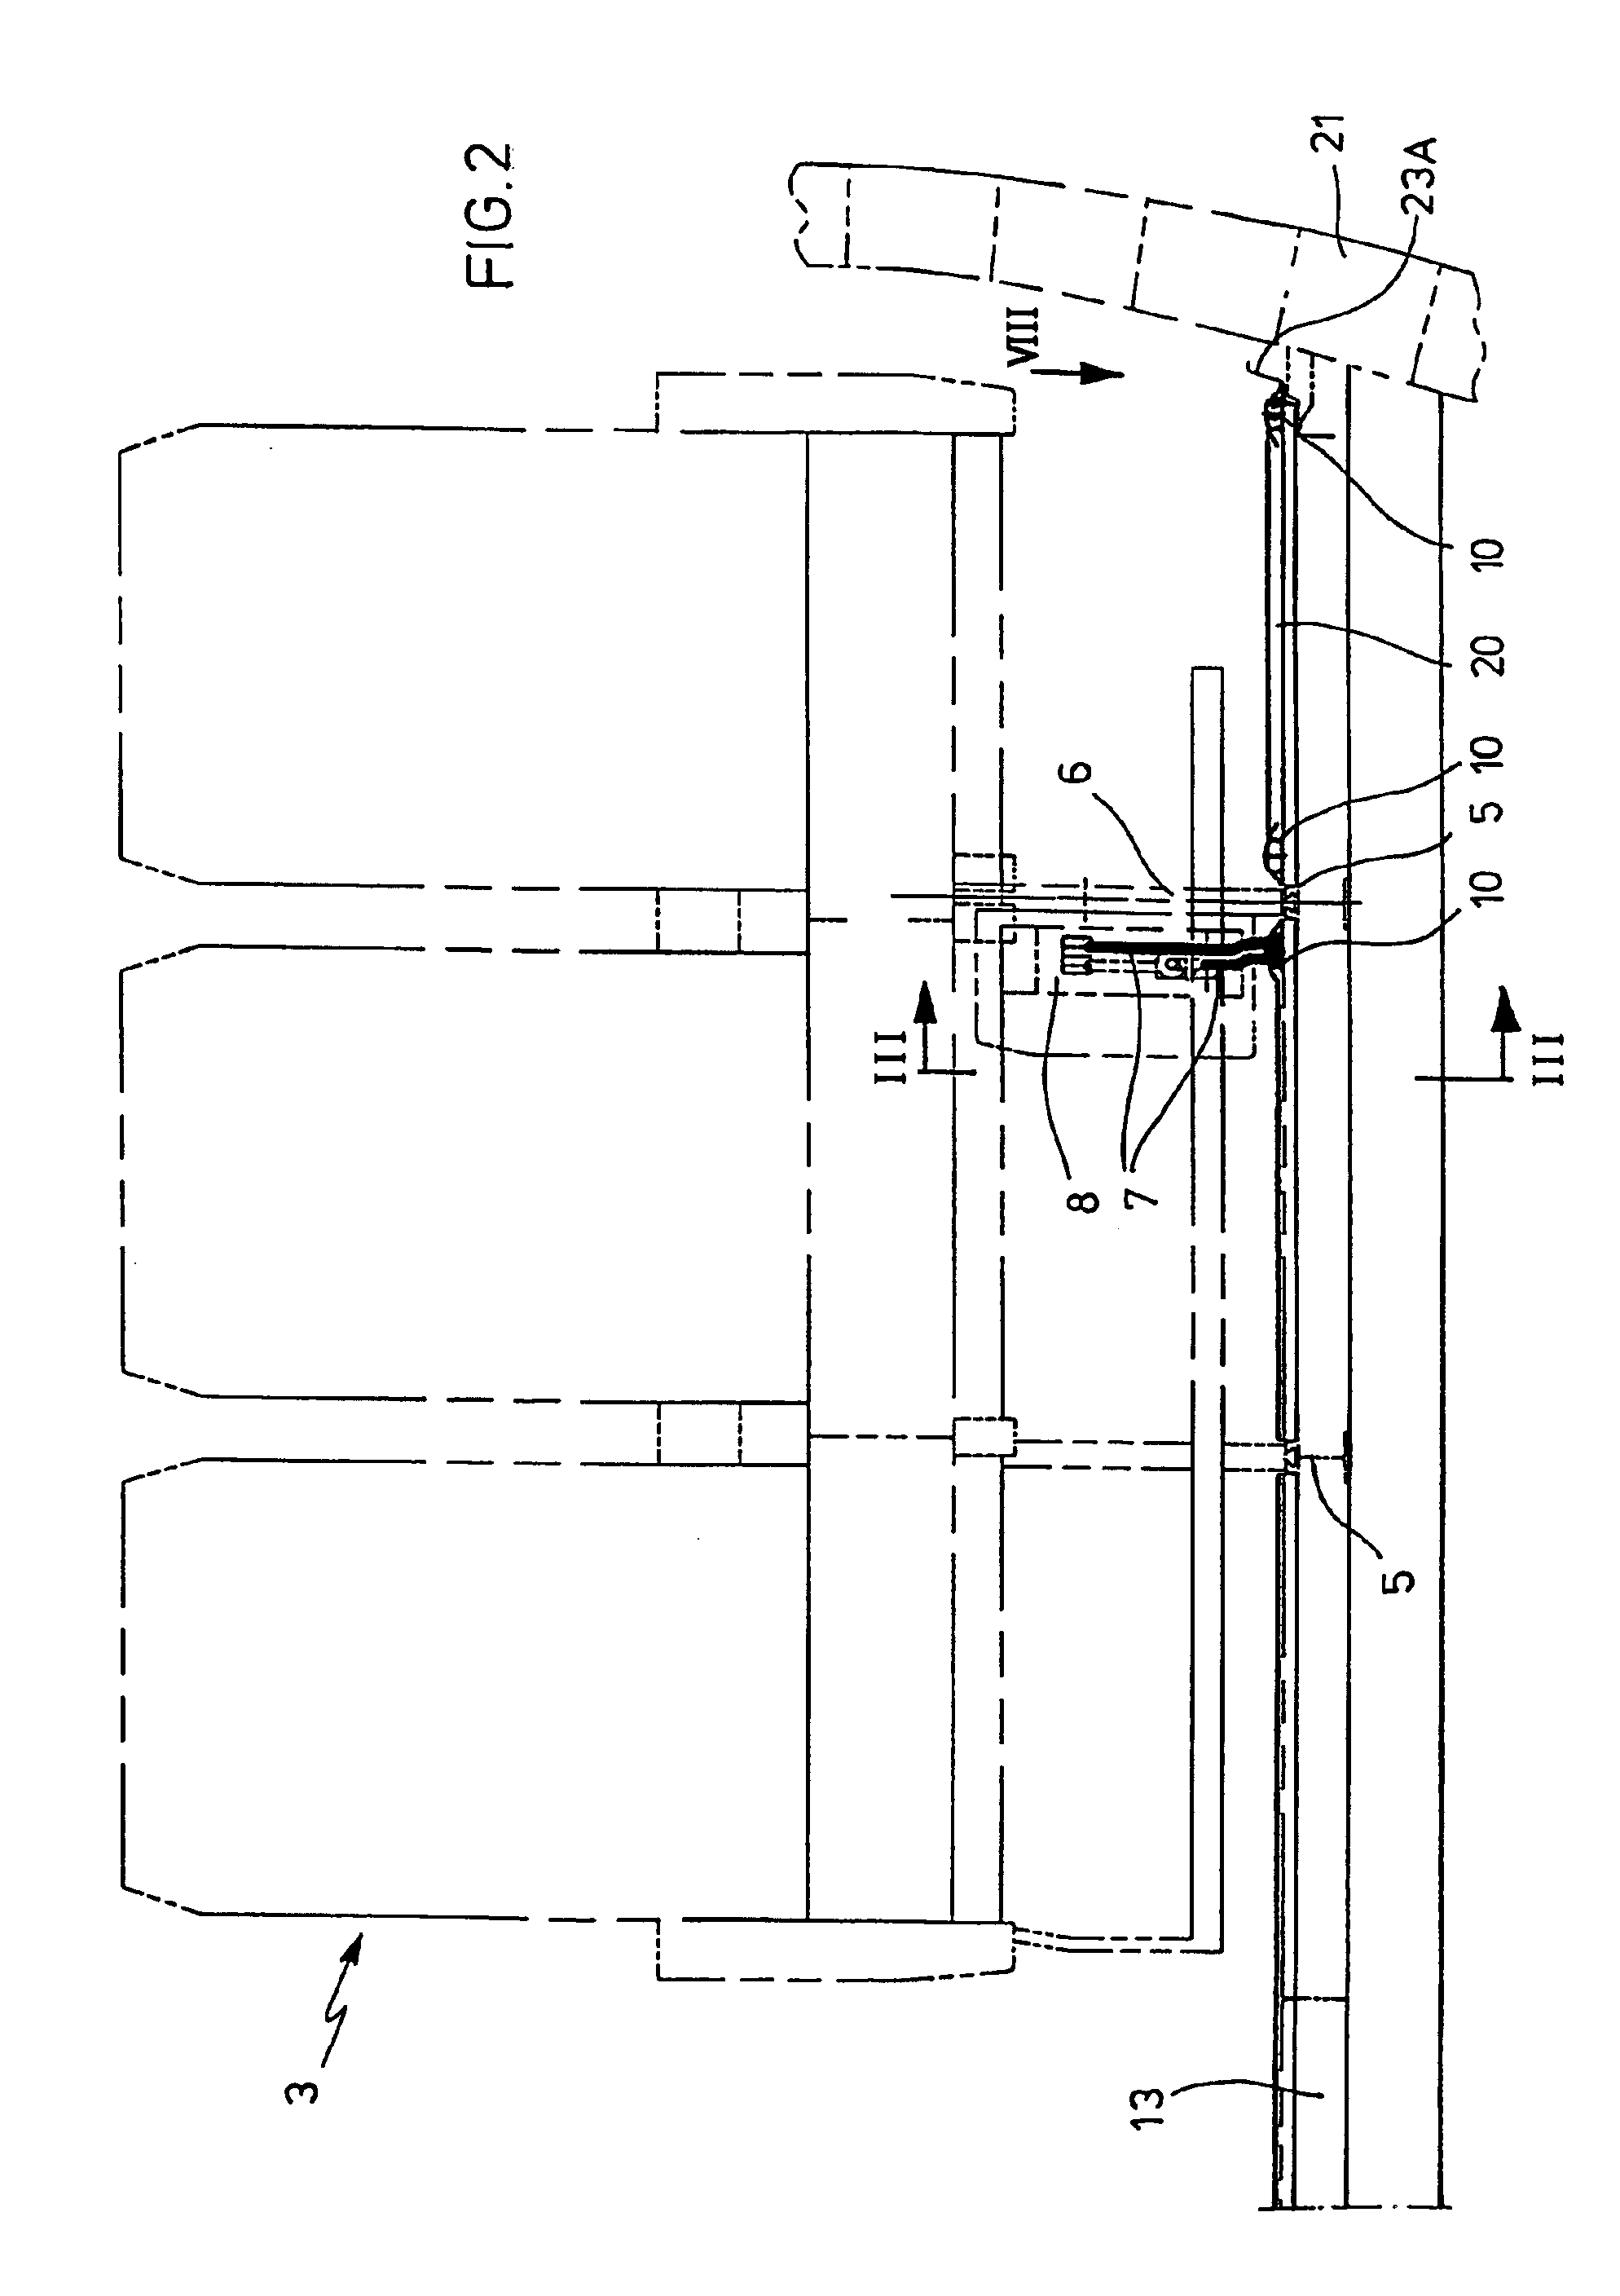 Arrangement for laying cables in the floor area of a passenger transport aircraft